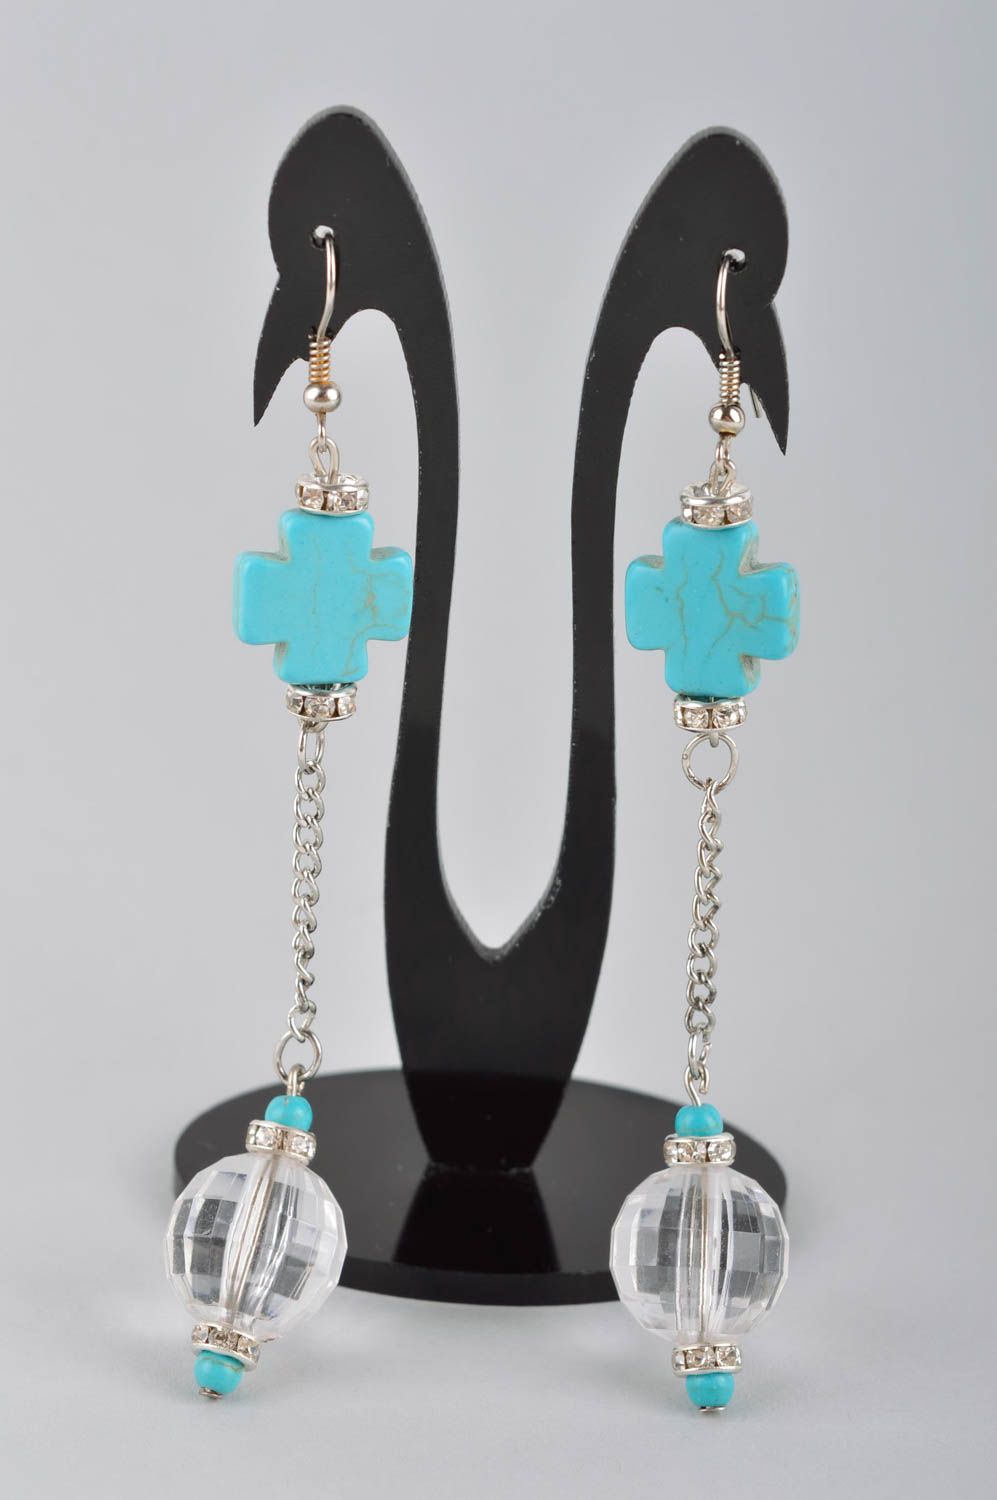 Handmade earrings with turquoise long earrings with charms evening jewelry photo 2